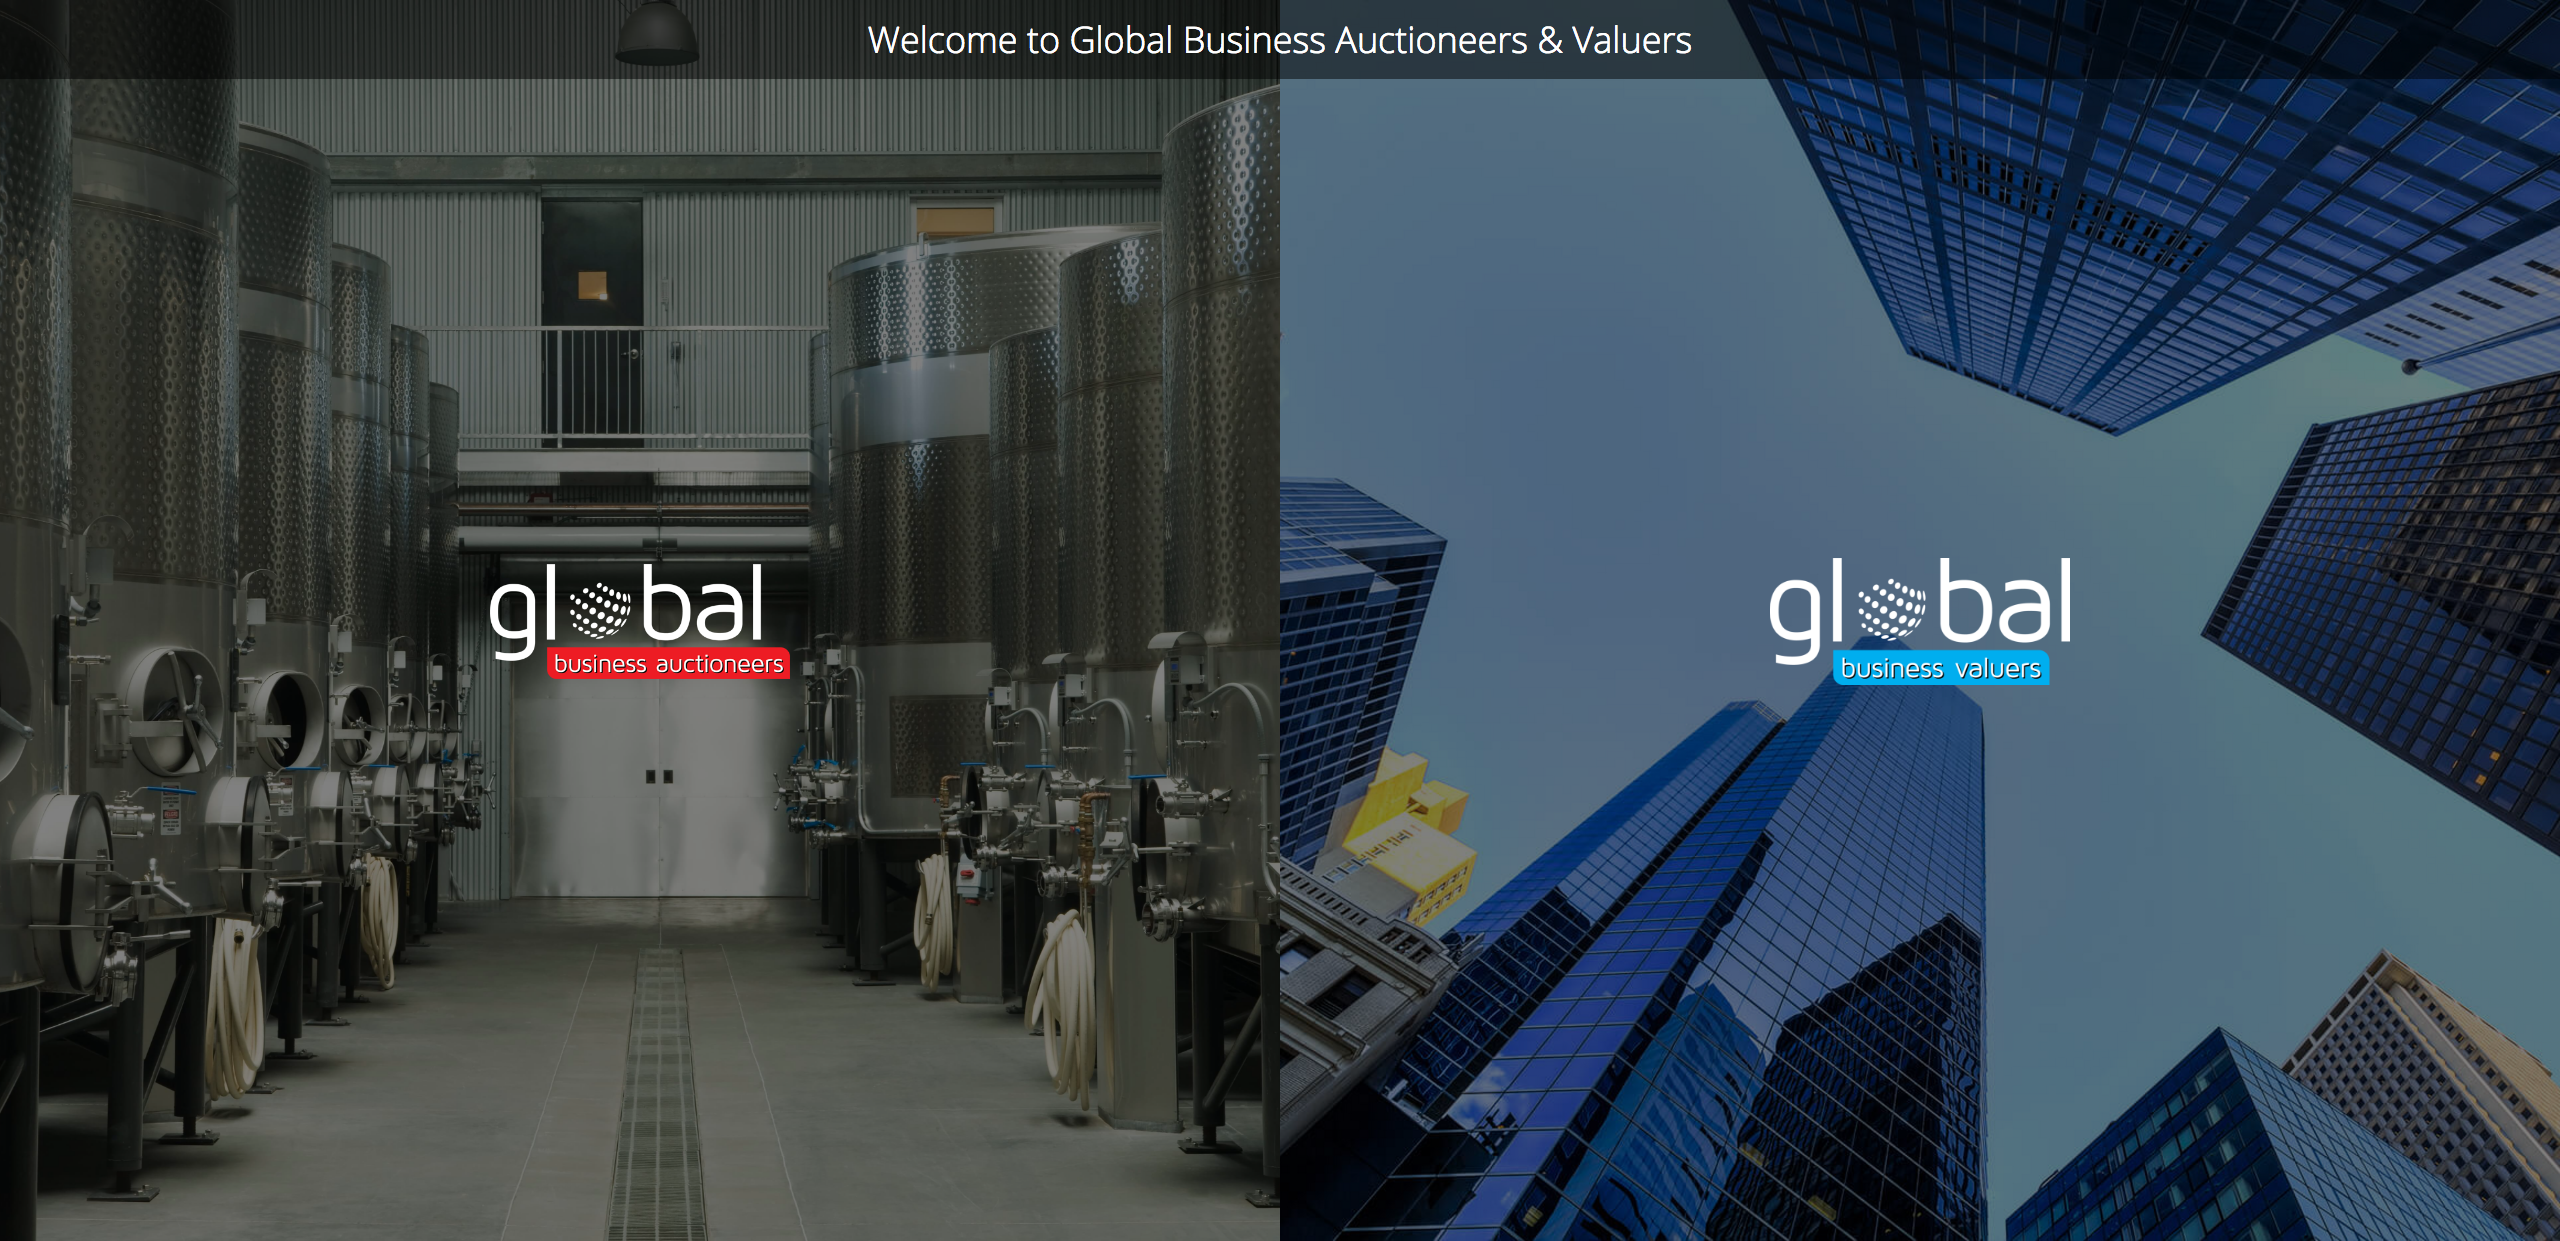 global business auctioneers and valuers hub